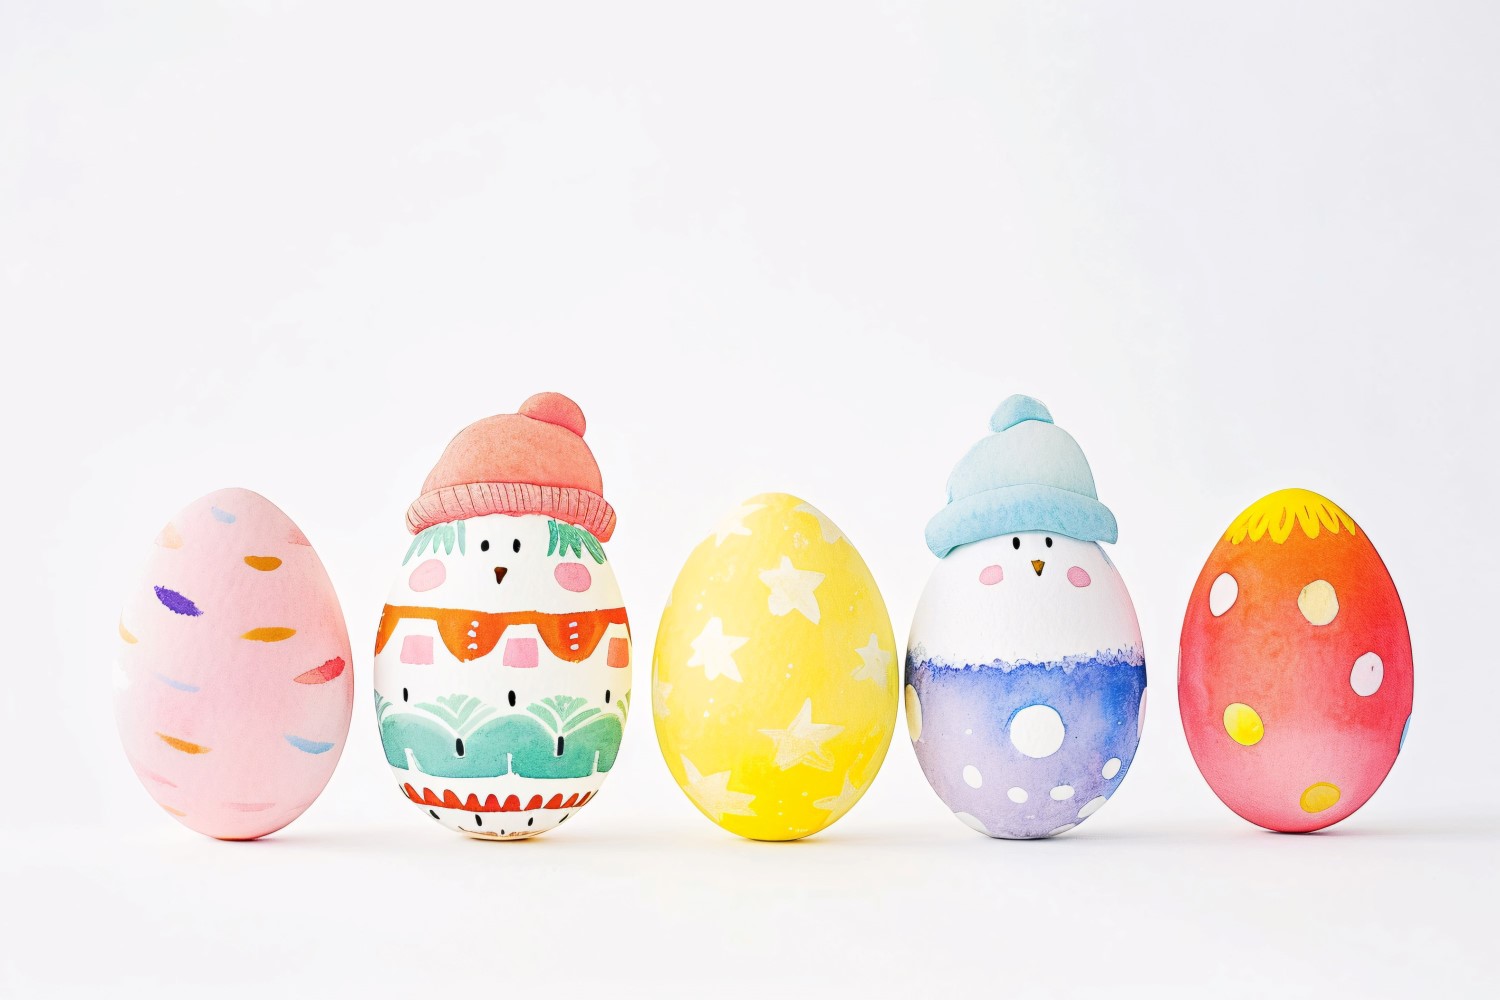 Decorative Eggs With A Hat On His Eyes Near Giant Easter Egg 164